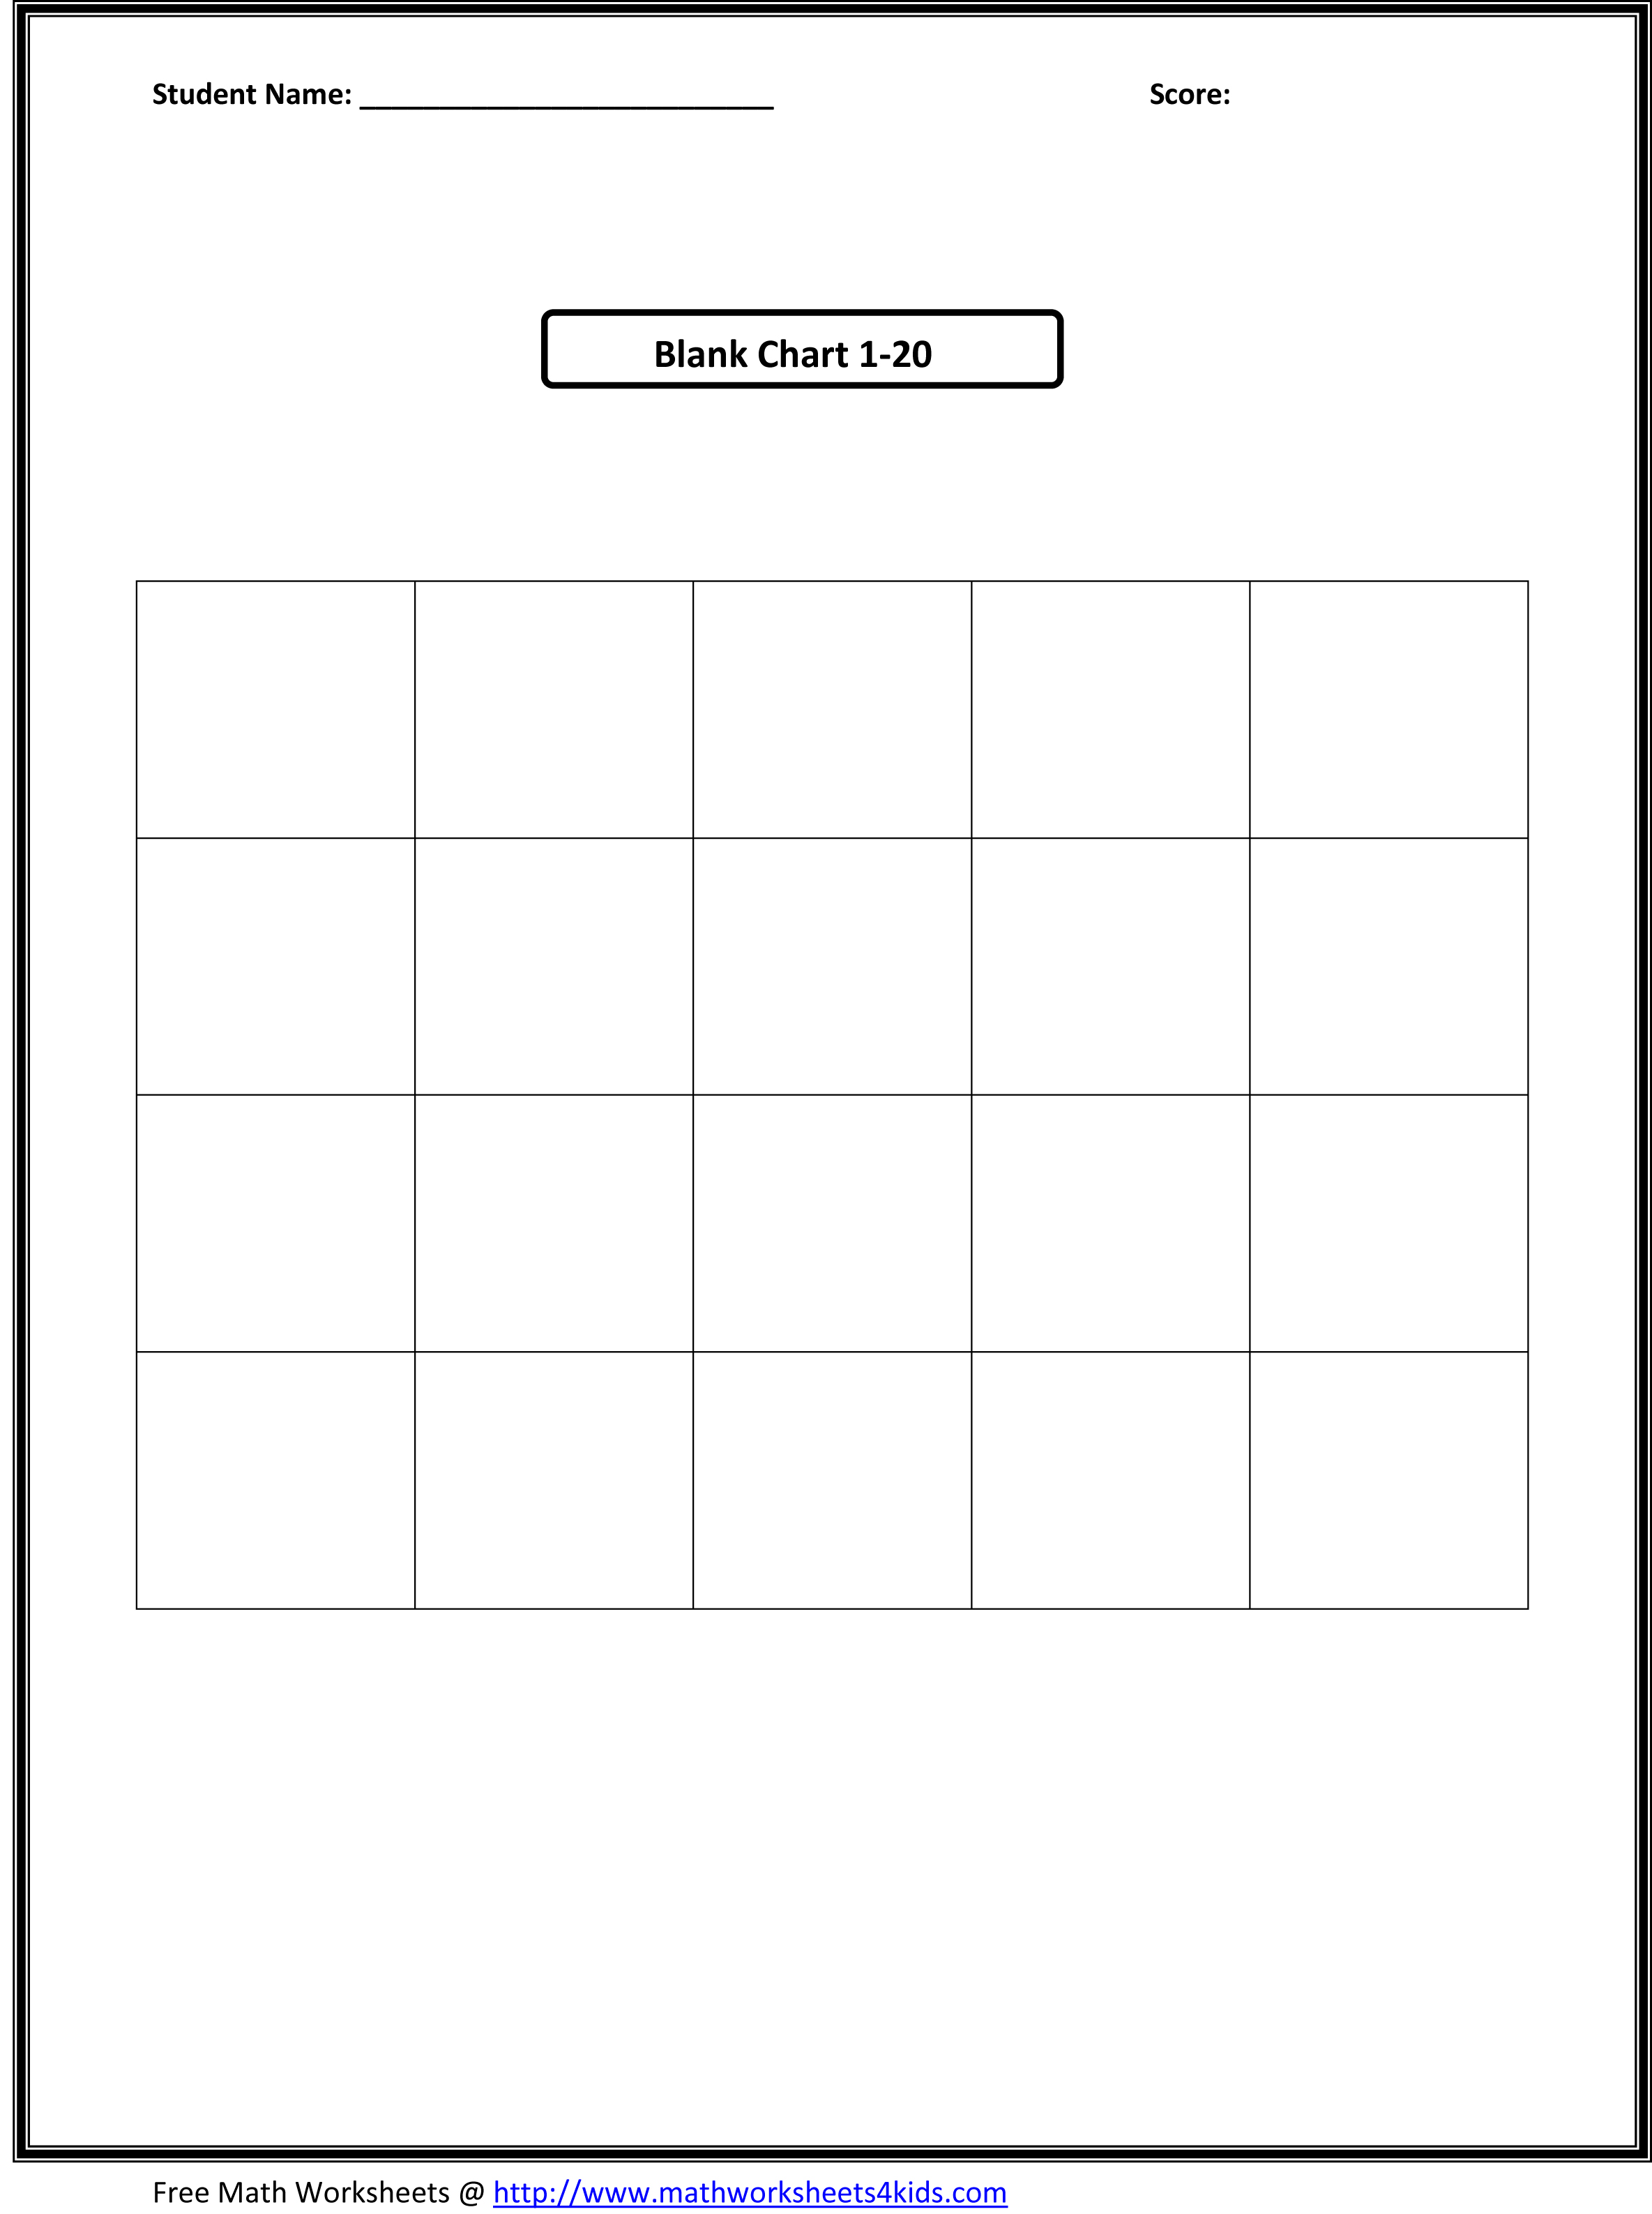 13 Best Images of Math Worksheets Counting 1 20 - Blank Number Chart 1